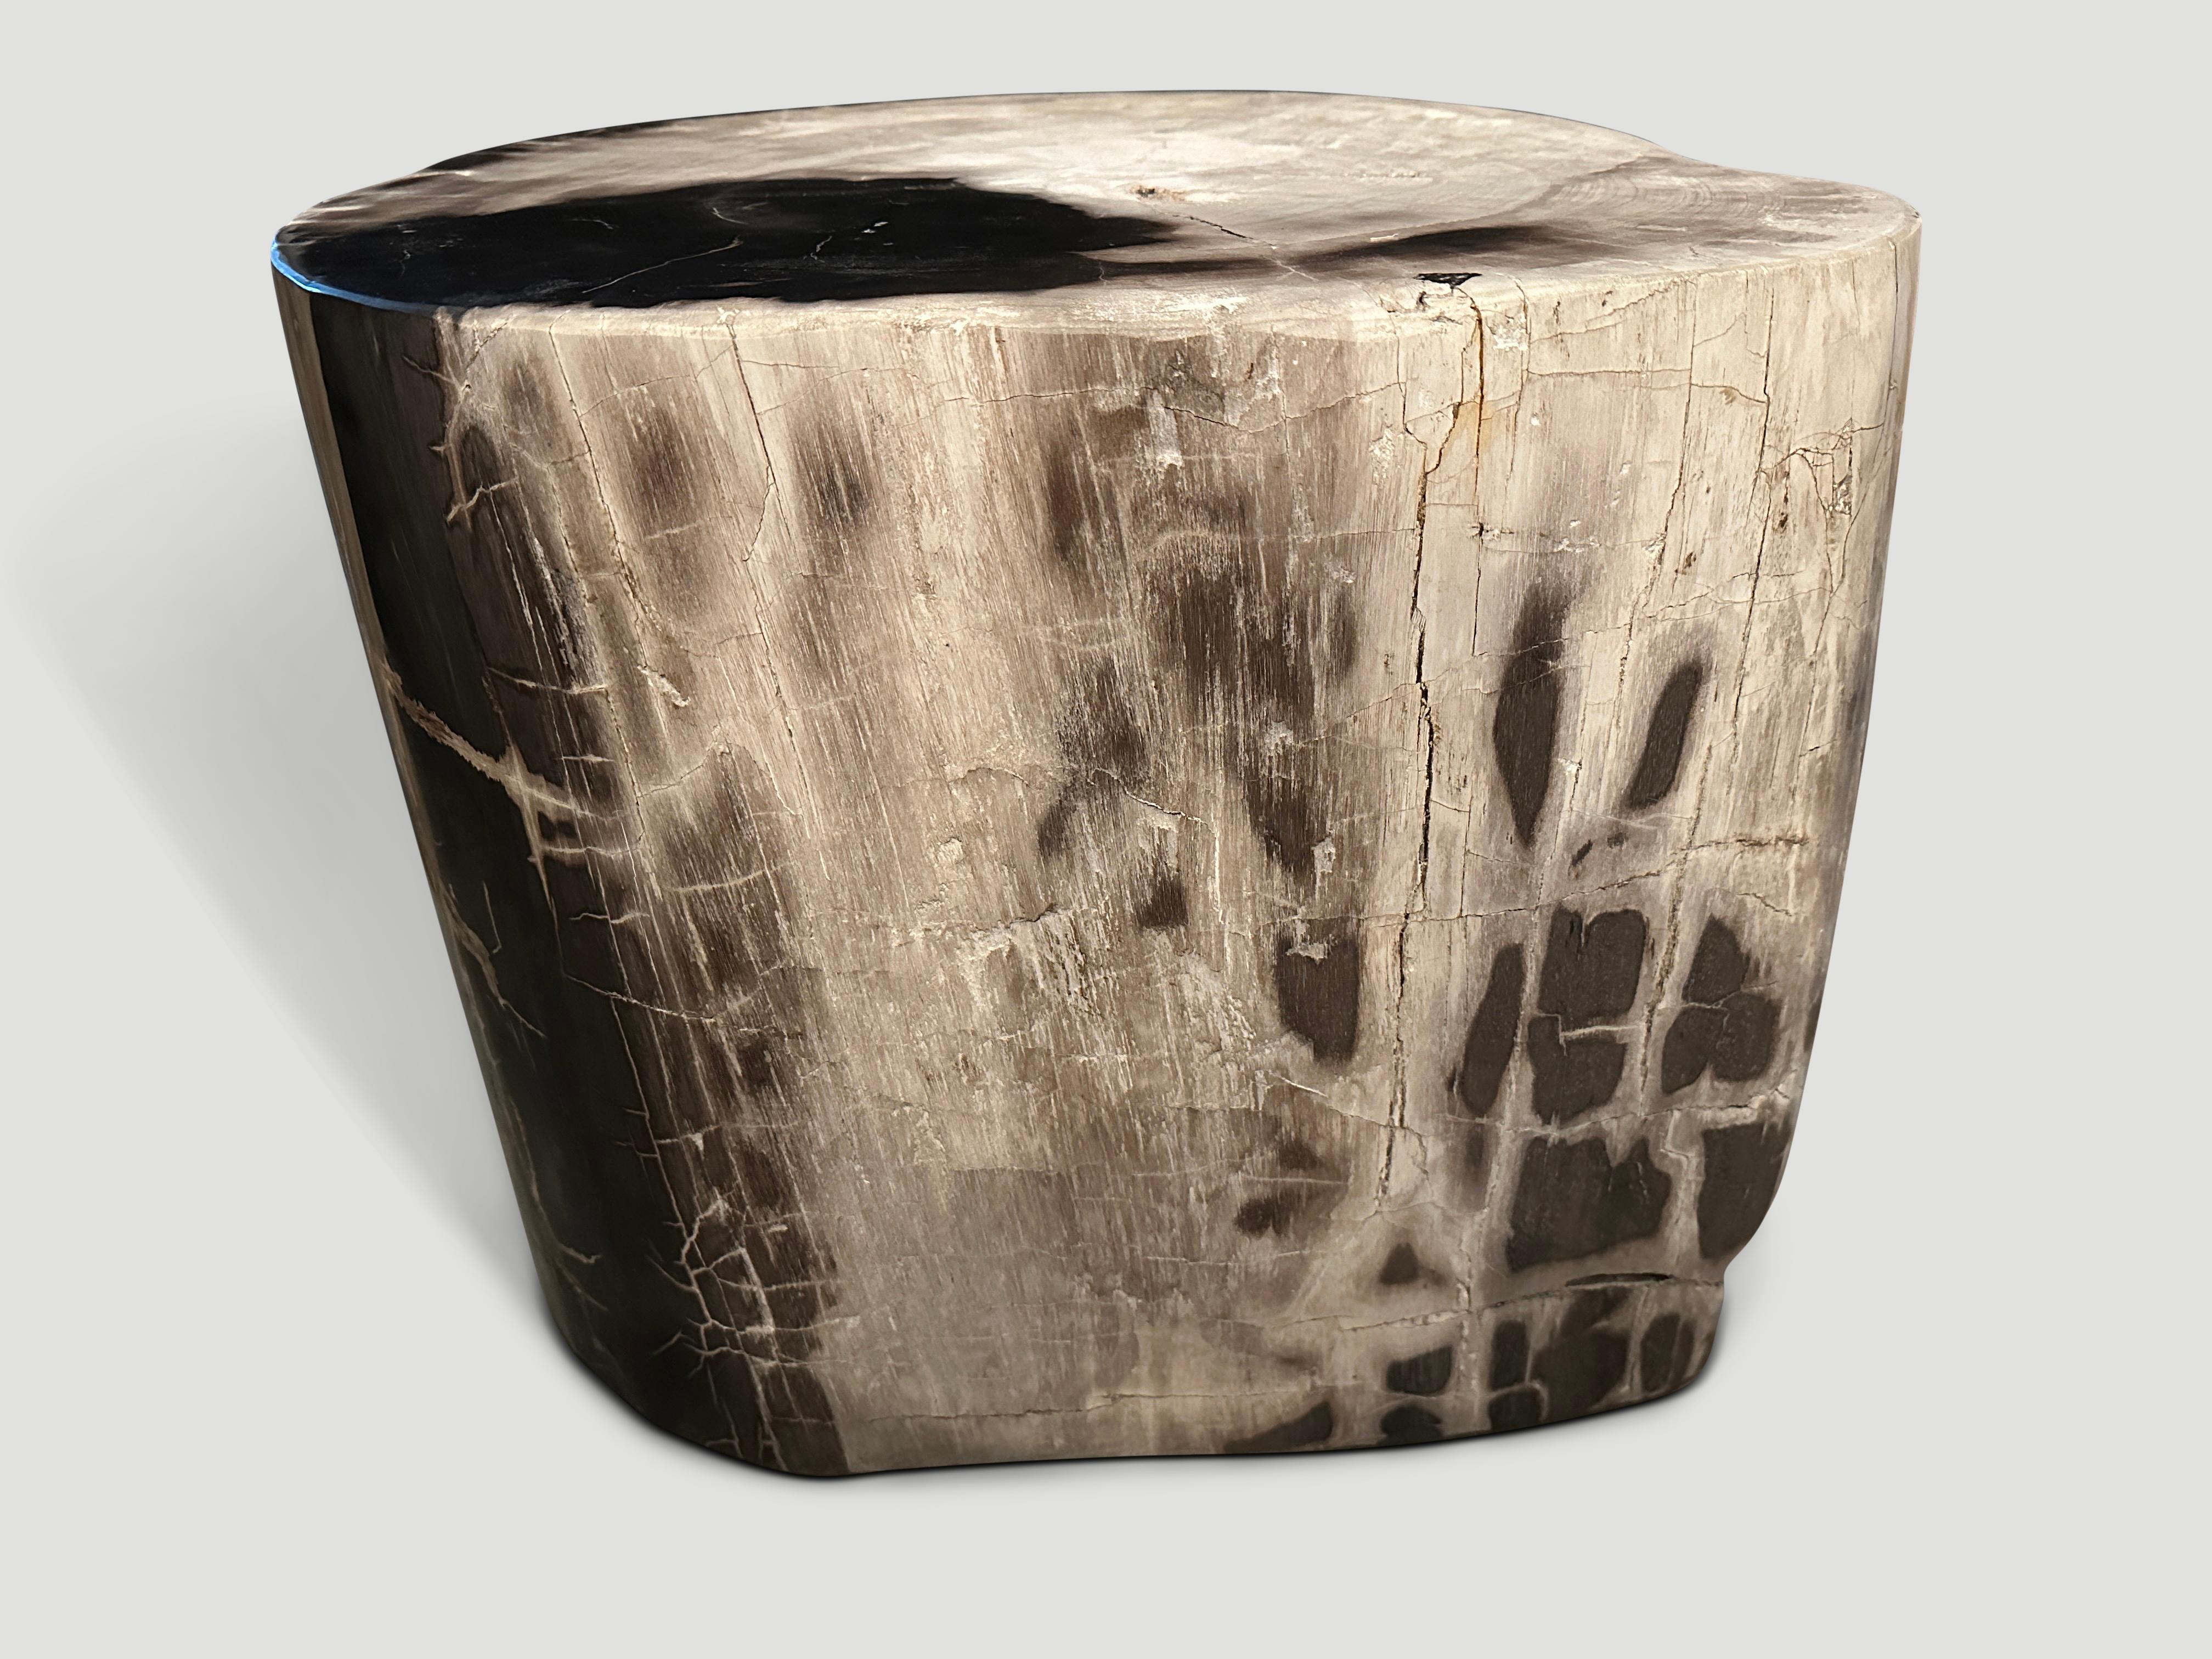 Beautiful dramatic tones and markings on this impressive high quality petrified wood ancient side table. It’s fascinating how Mother Nature produces these exquisite 40 million year old petrified teak logs with such contrasting colors and natural